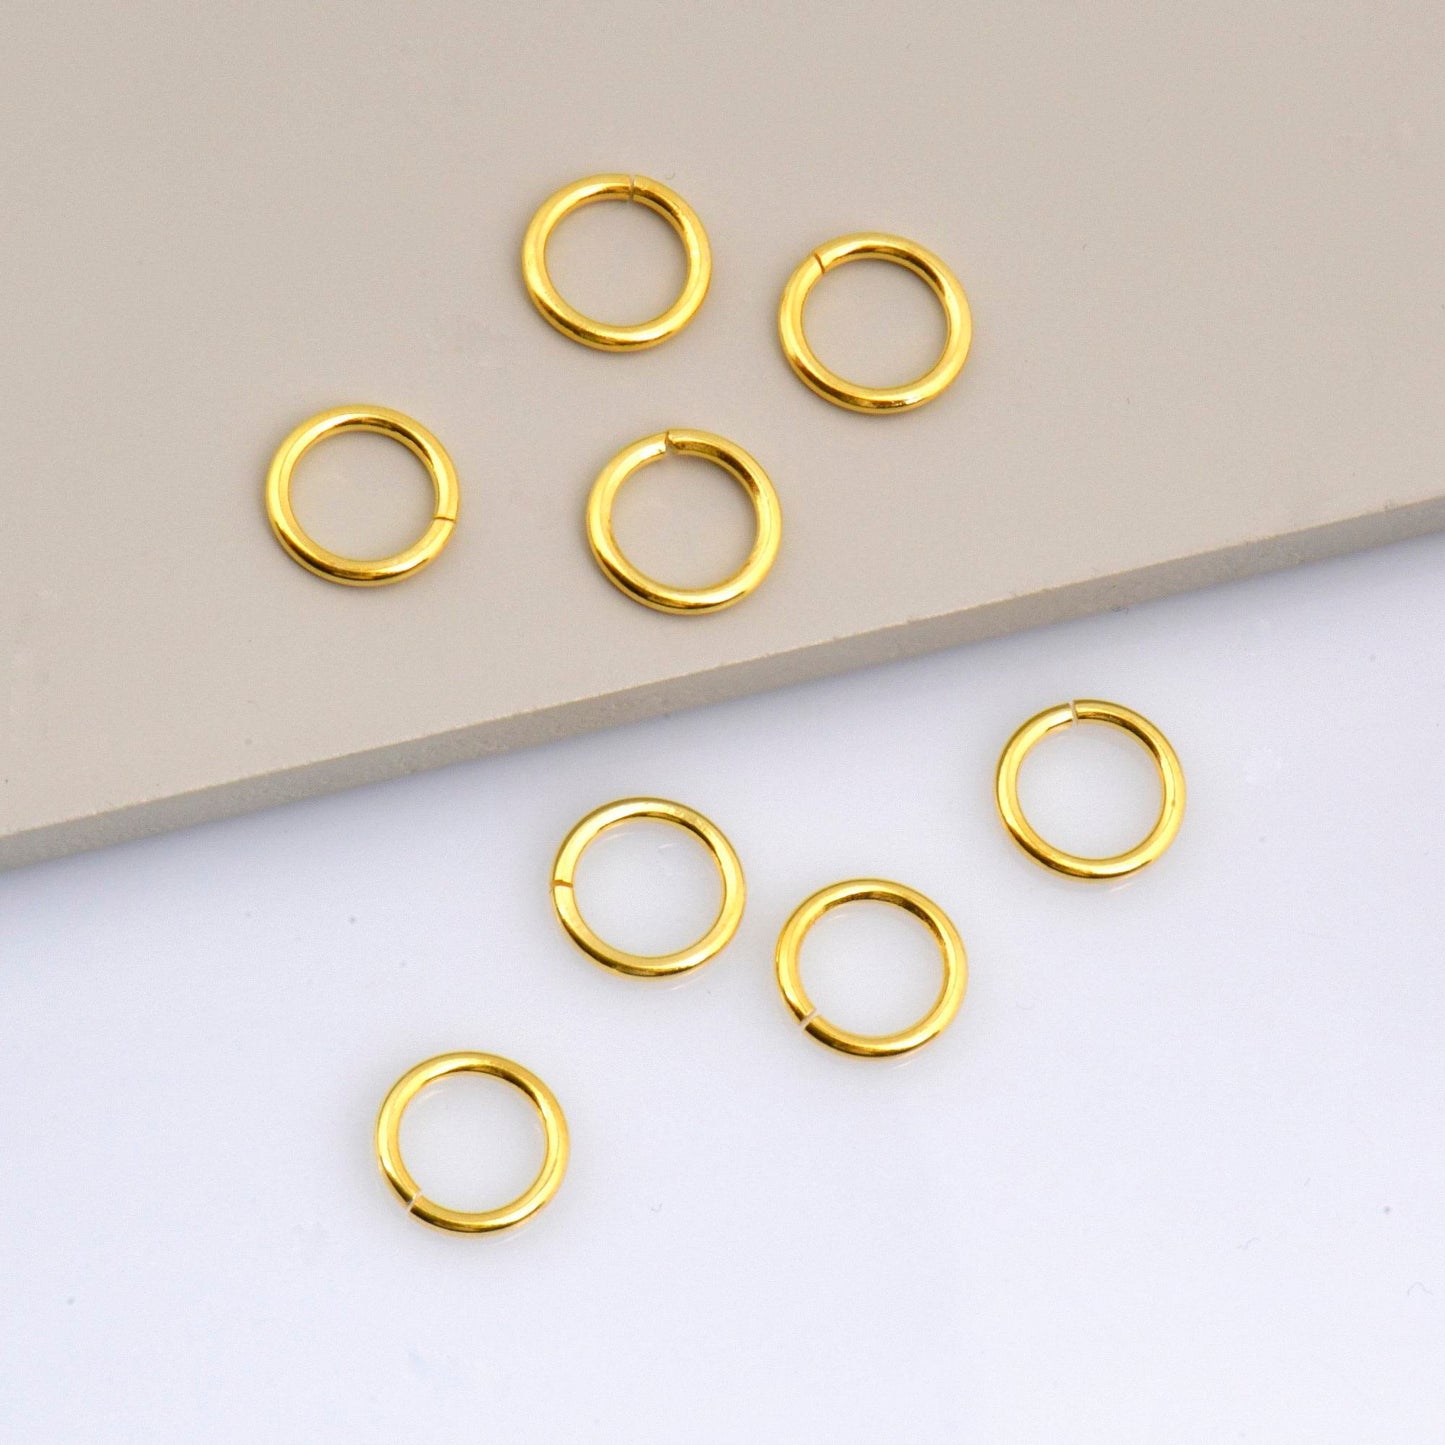 Gold Vermeil & Sterling Open High quality Tough Jump Rings, 925 Silver and 24K Gold Plated Open Rings, Jewelry Supplies, M/VM68 A to E